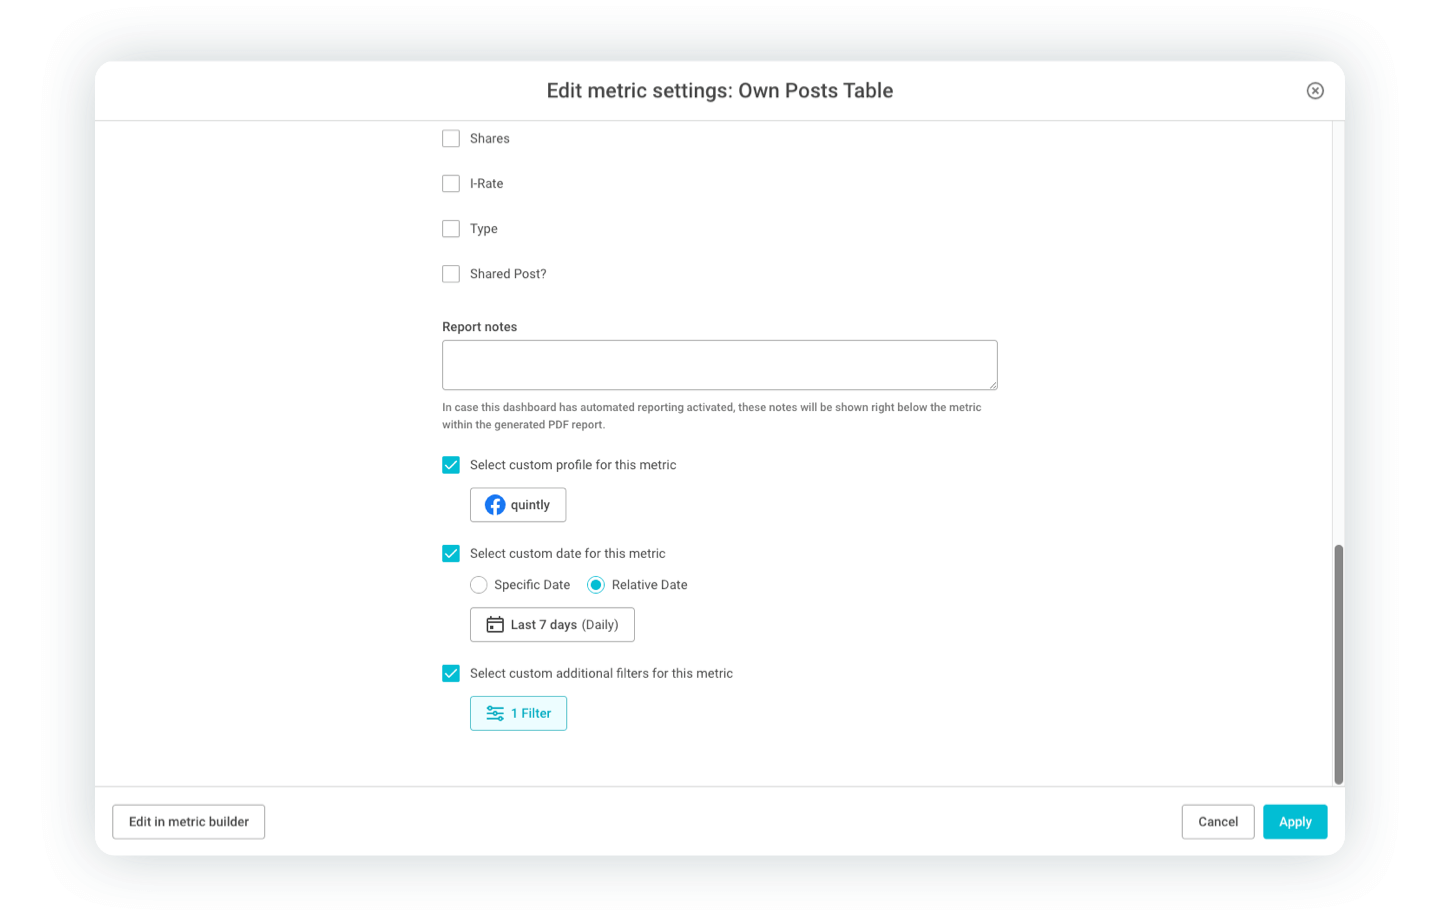 Advanced filtering on the metric level